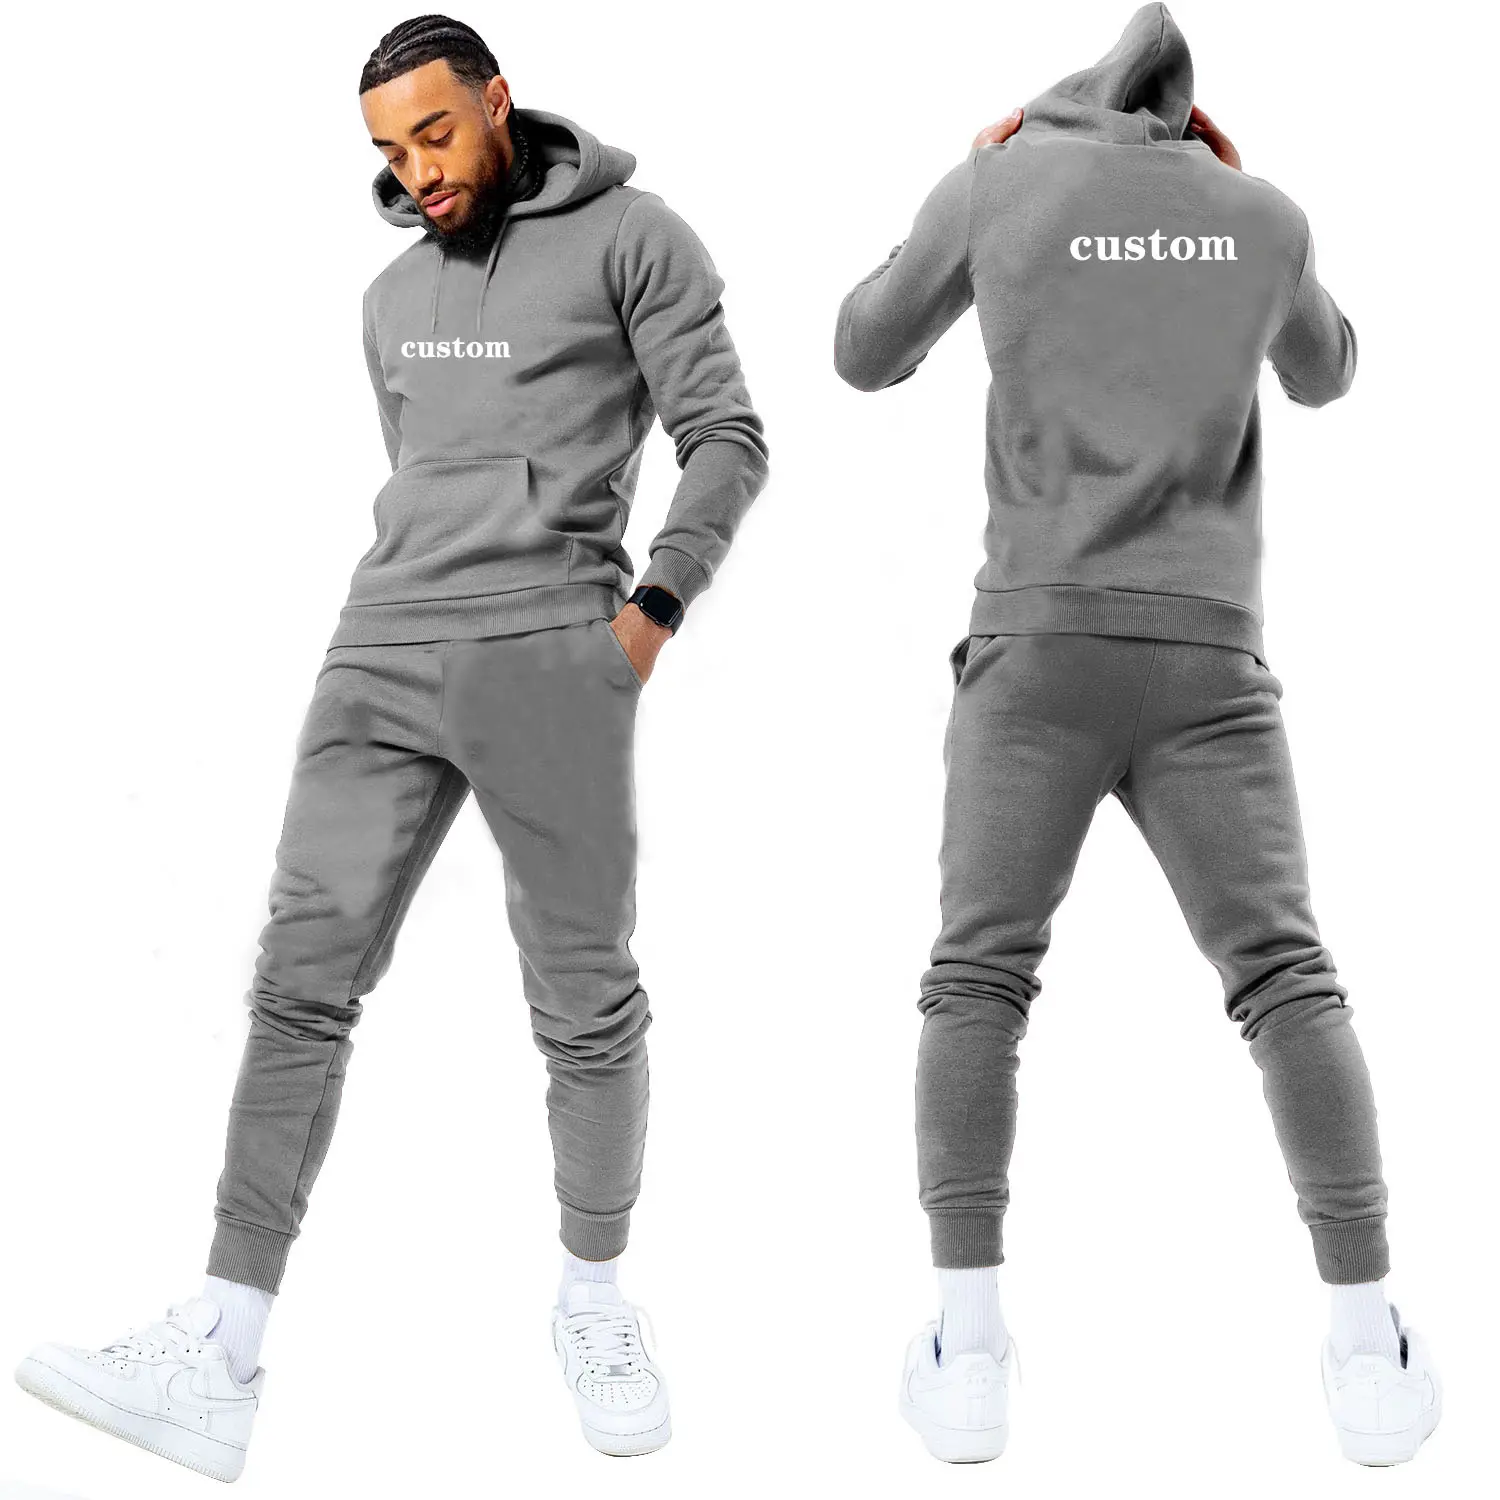 High Quality Mens Training Gym Sports Suit Track Suits Custom Trousers Two 2 Piece Set Jogging Tracksuit Designs For Men Women